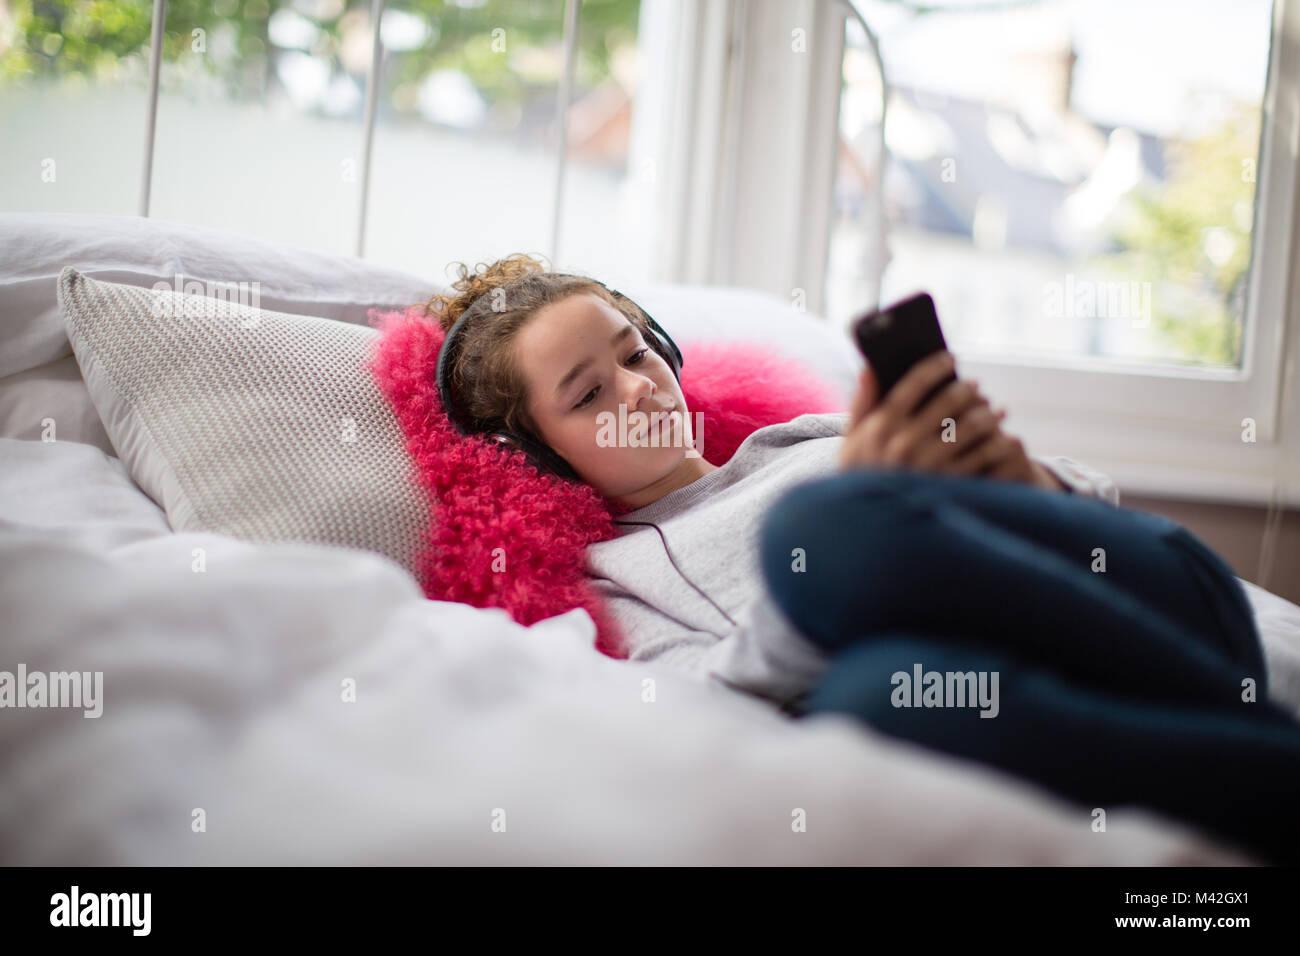 Teenager in bedroom listening to music on smartphone Stock Photo